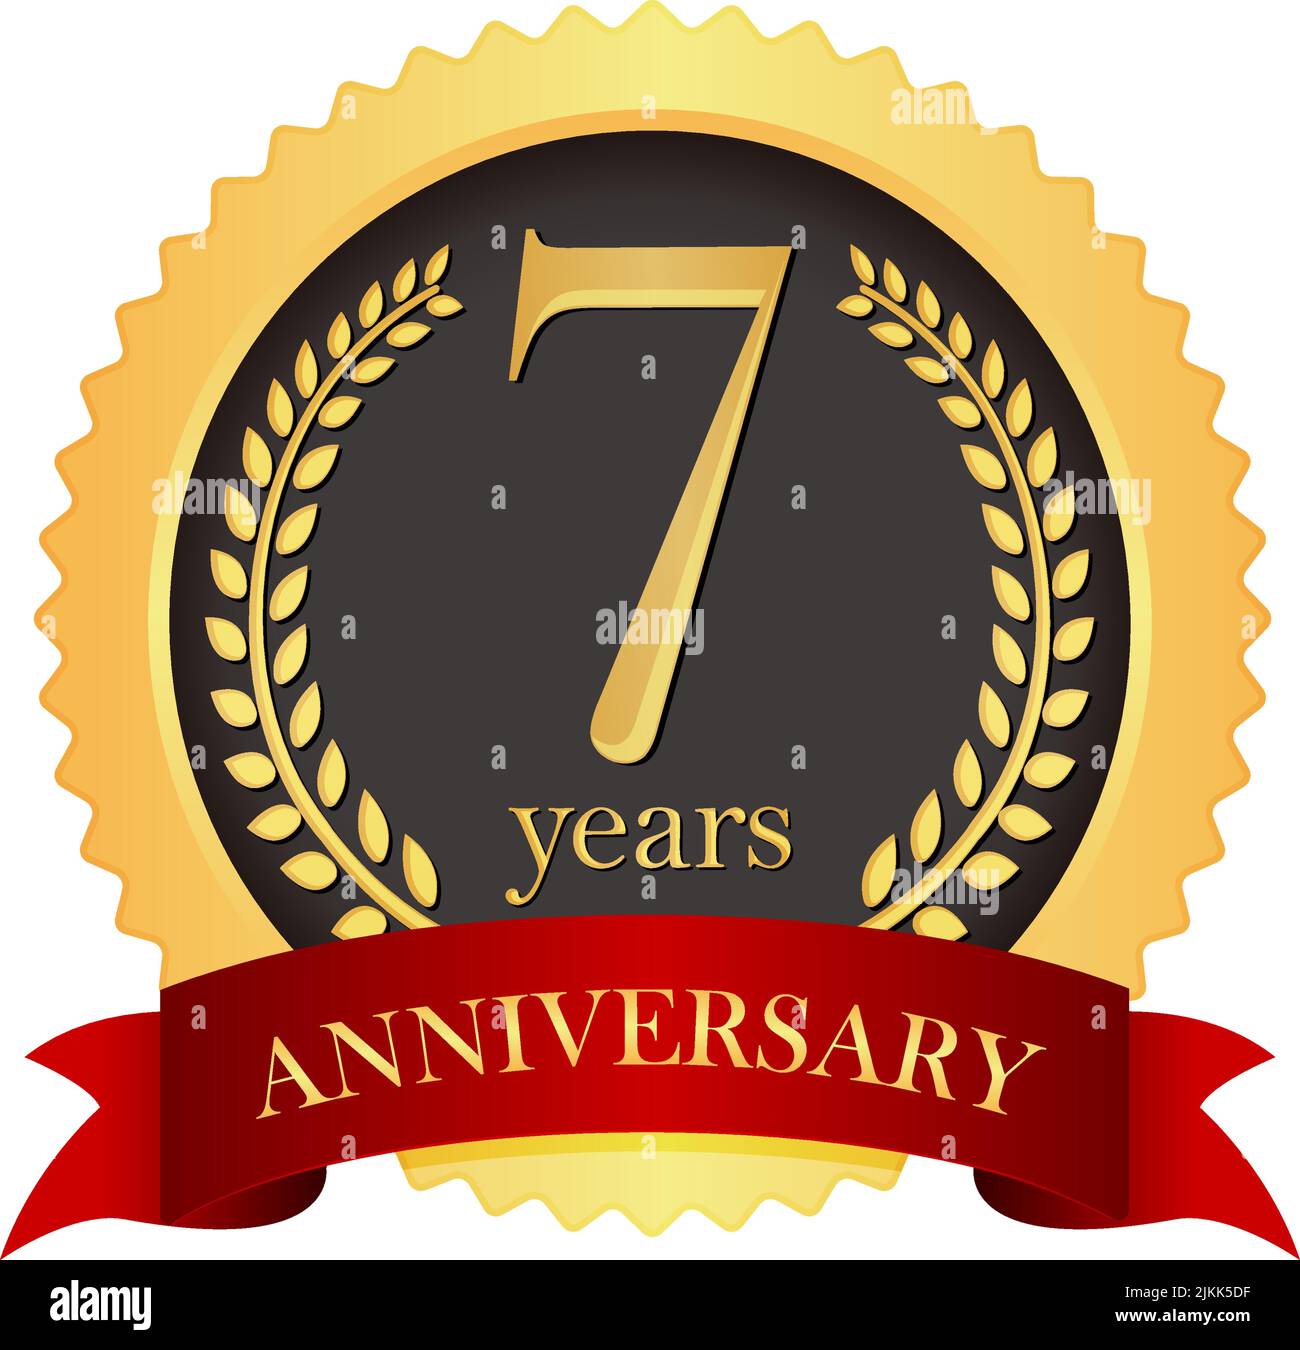 Golden anniversary medal icon | 7th anniversary Stock Vector Image ...